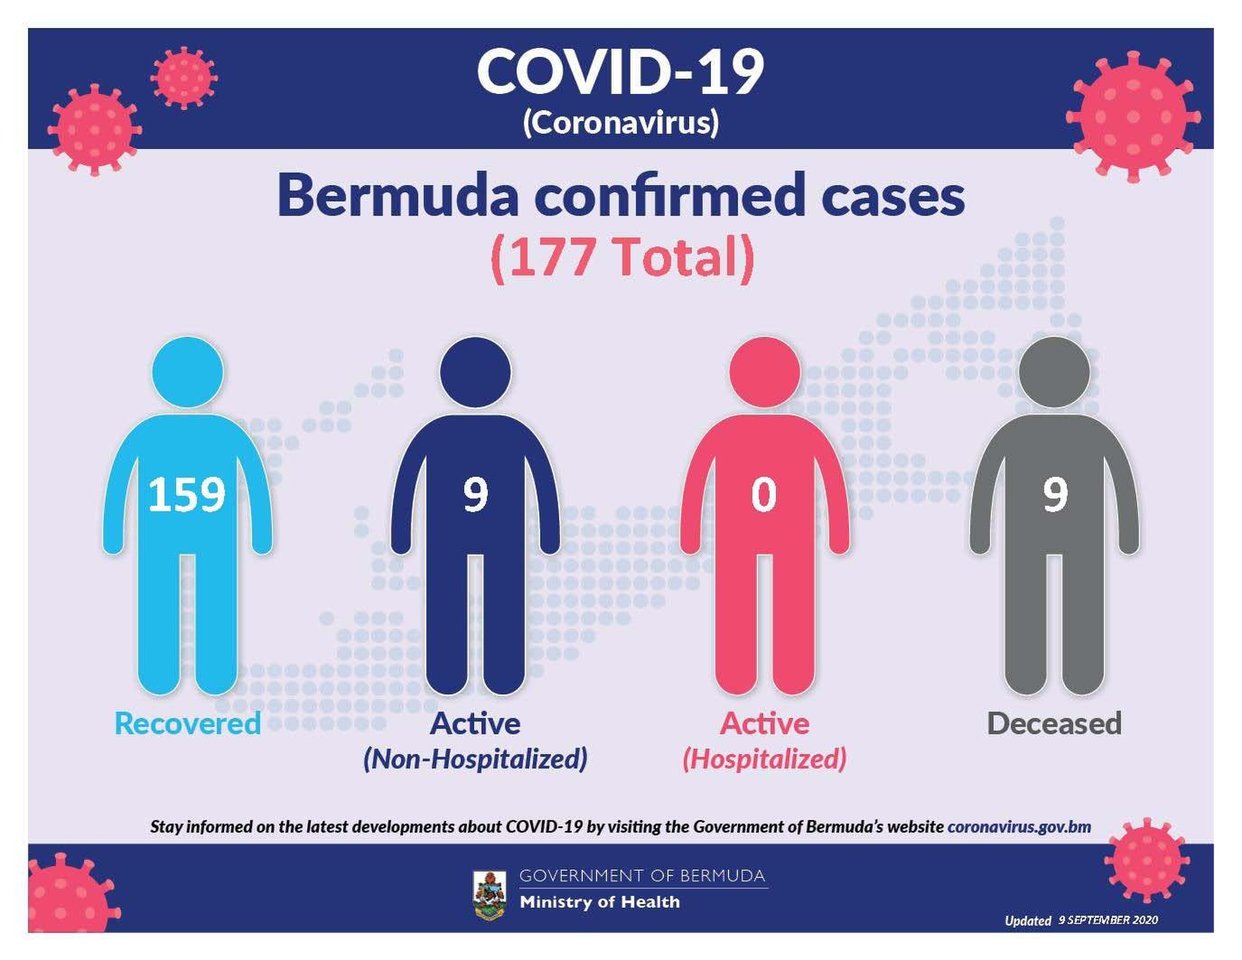 No new COVID-19 cases reported in Bermuda, 9 September